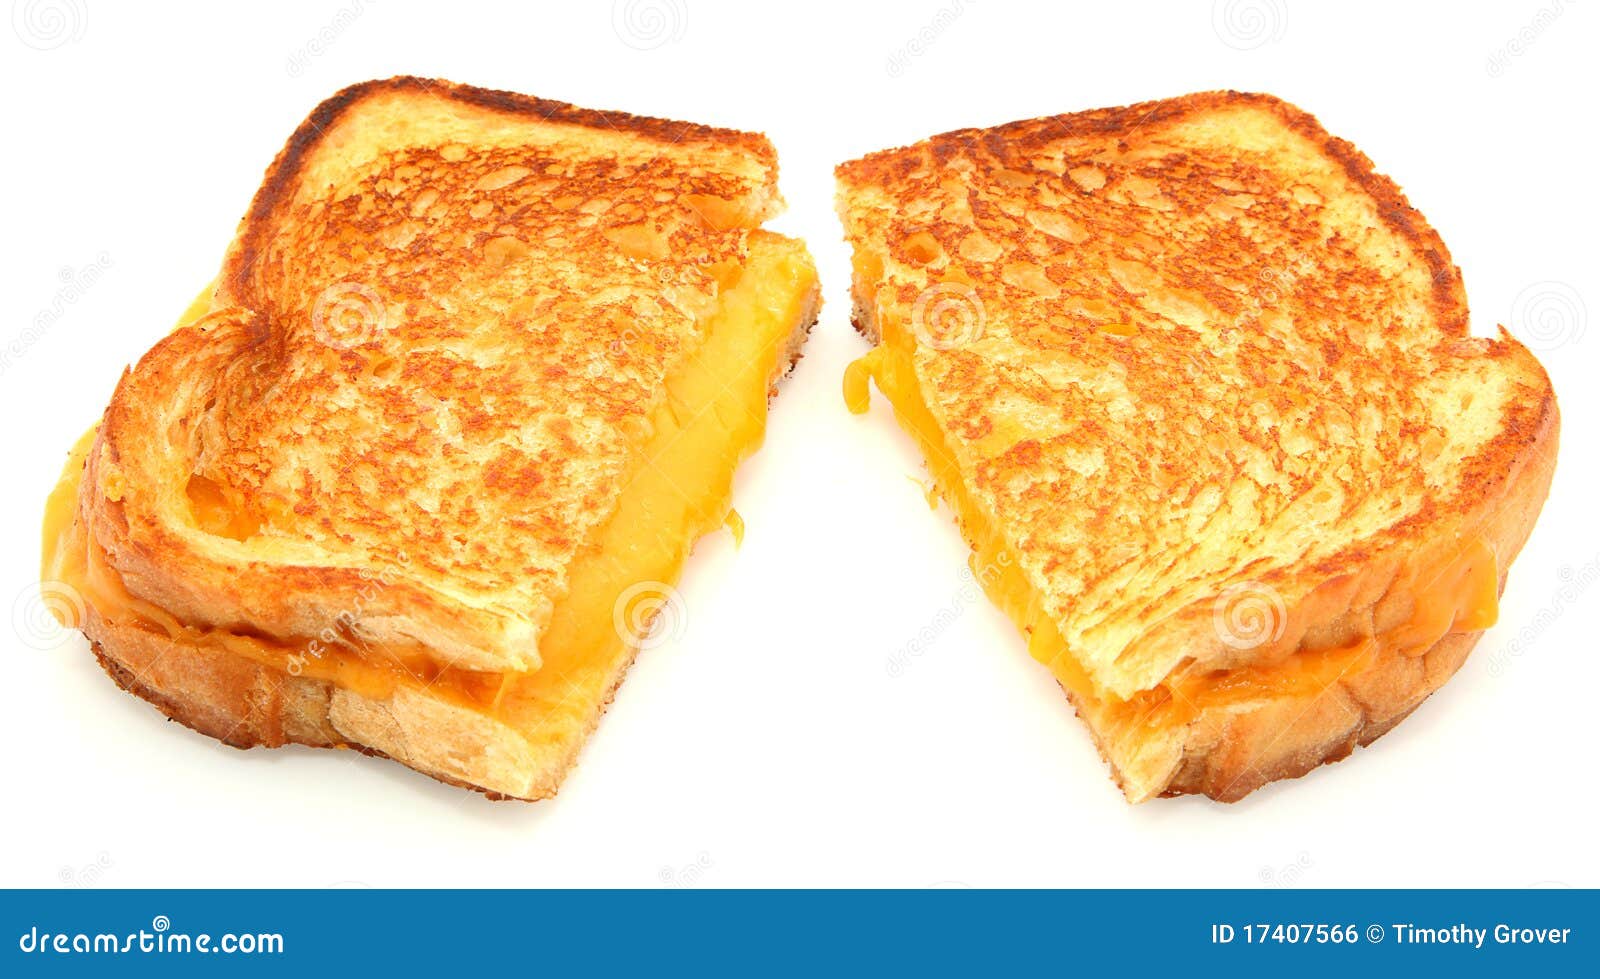 grilled cheese sandwich  on white